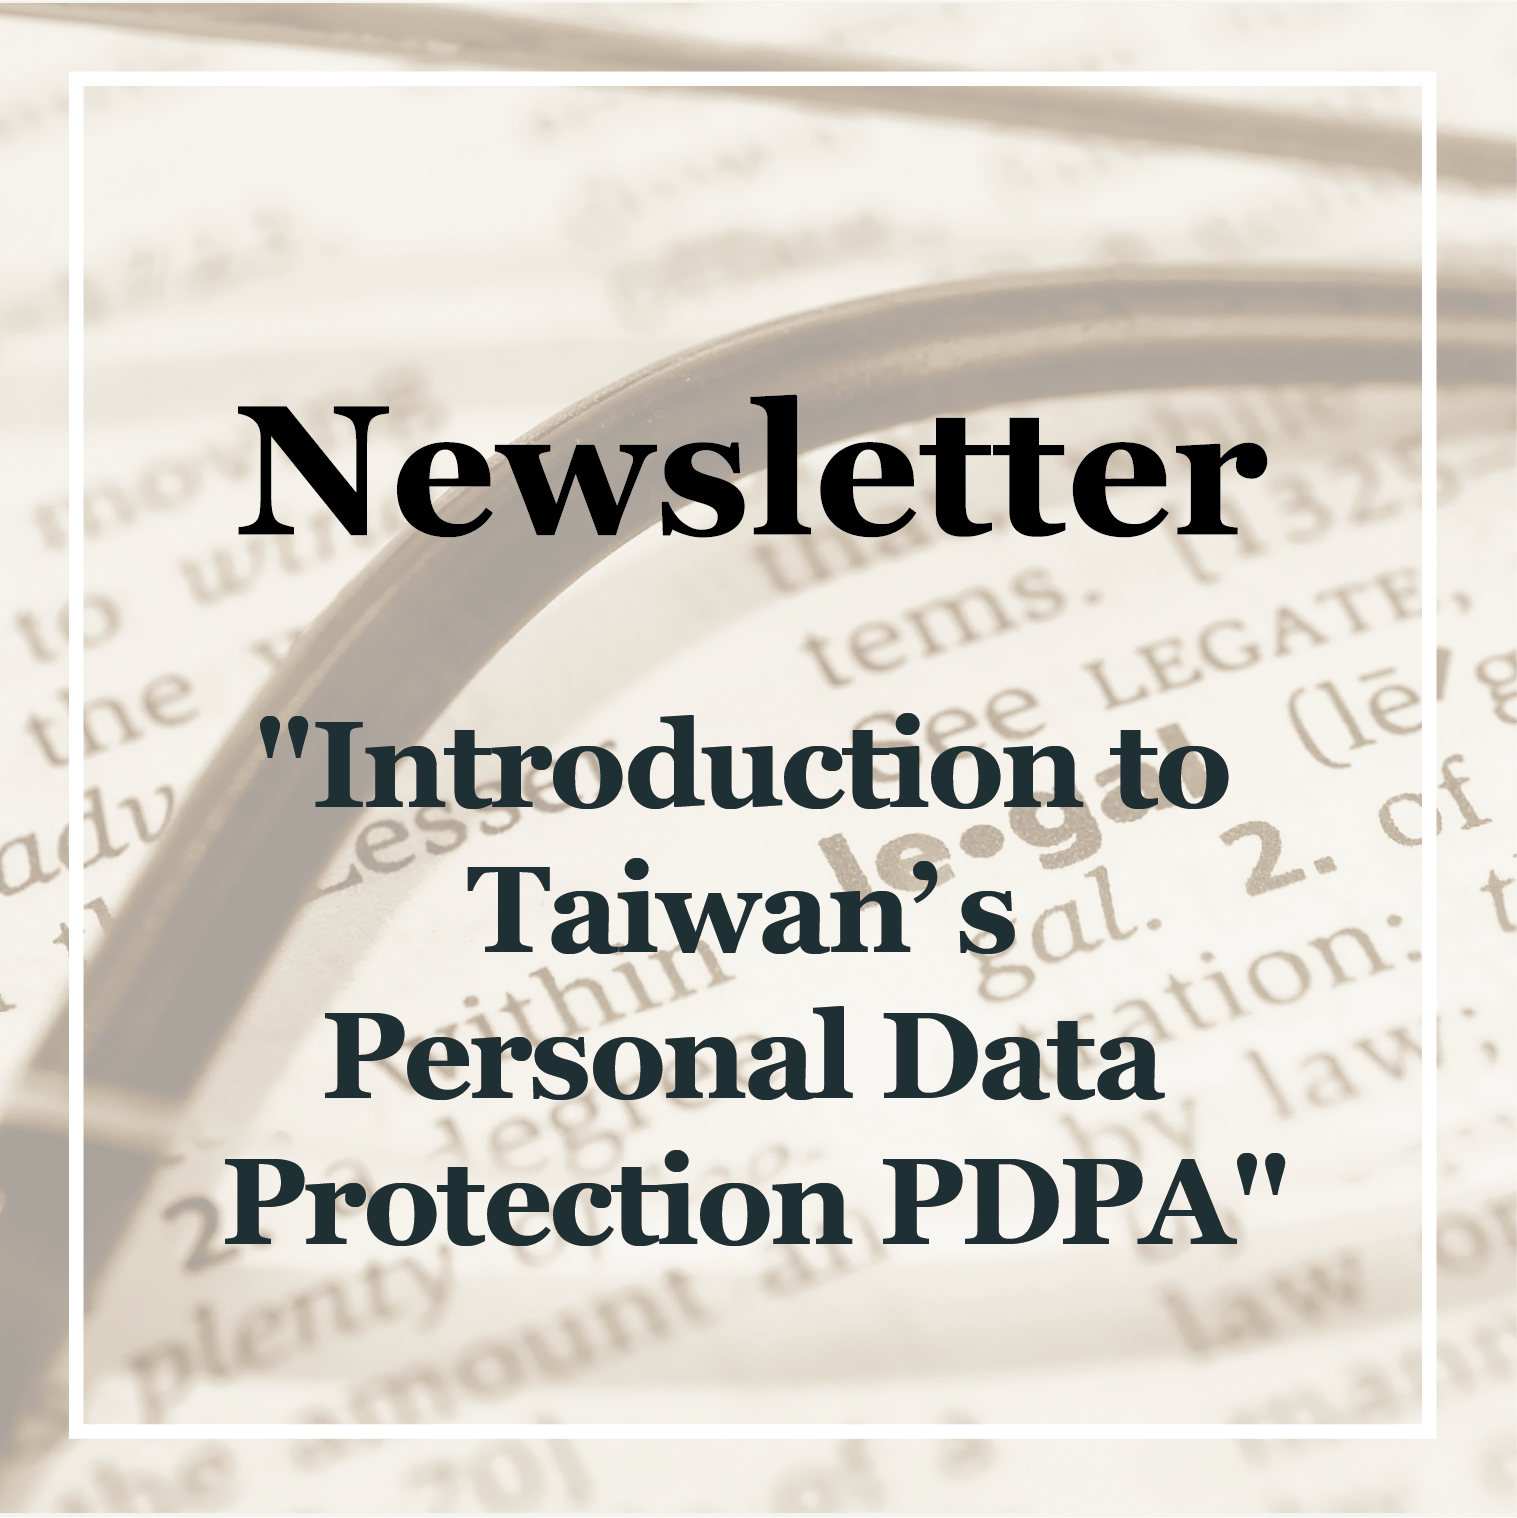 ”Introduction to Taiwan’s Personal Data Protection PDPA”: Taiwan Team